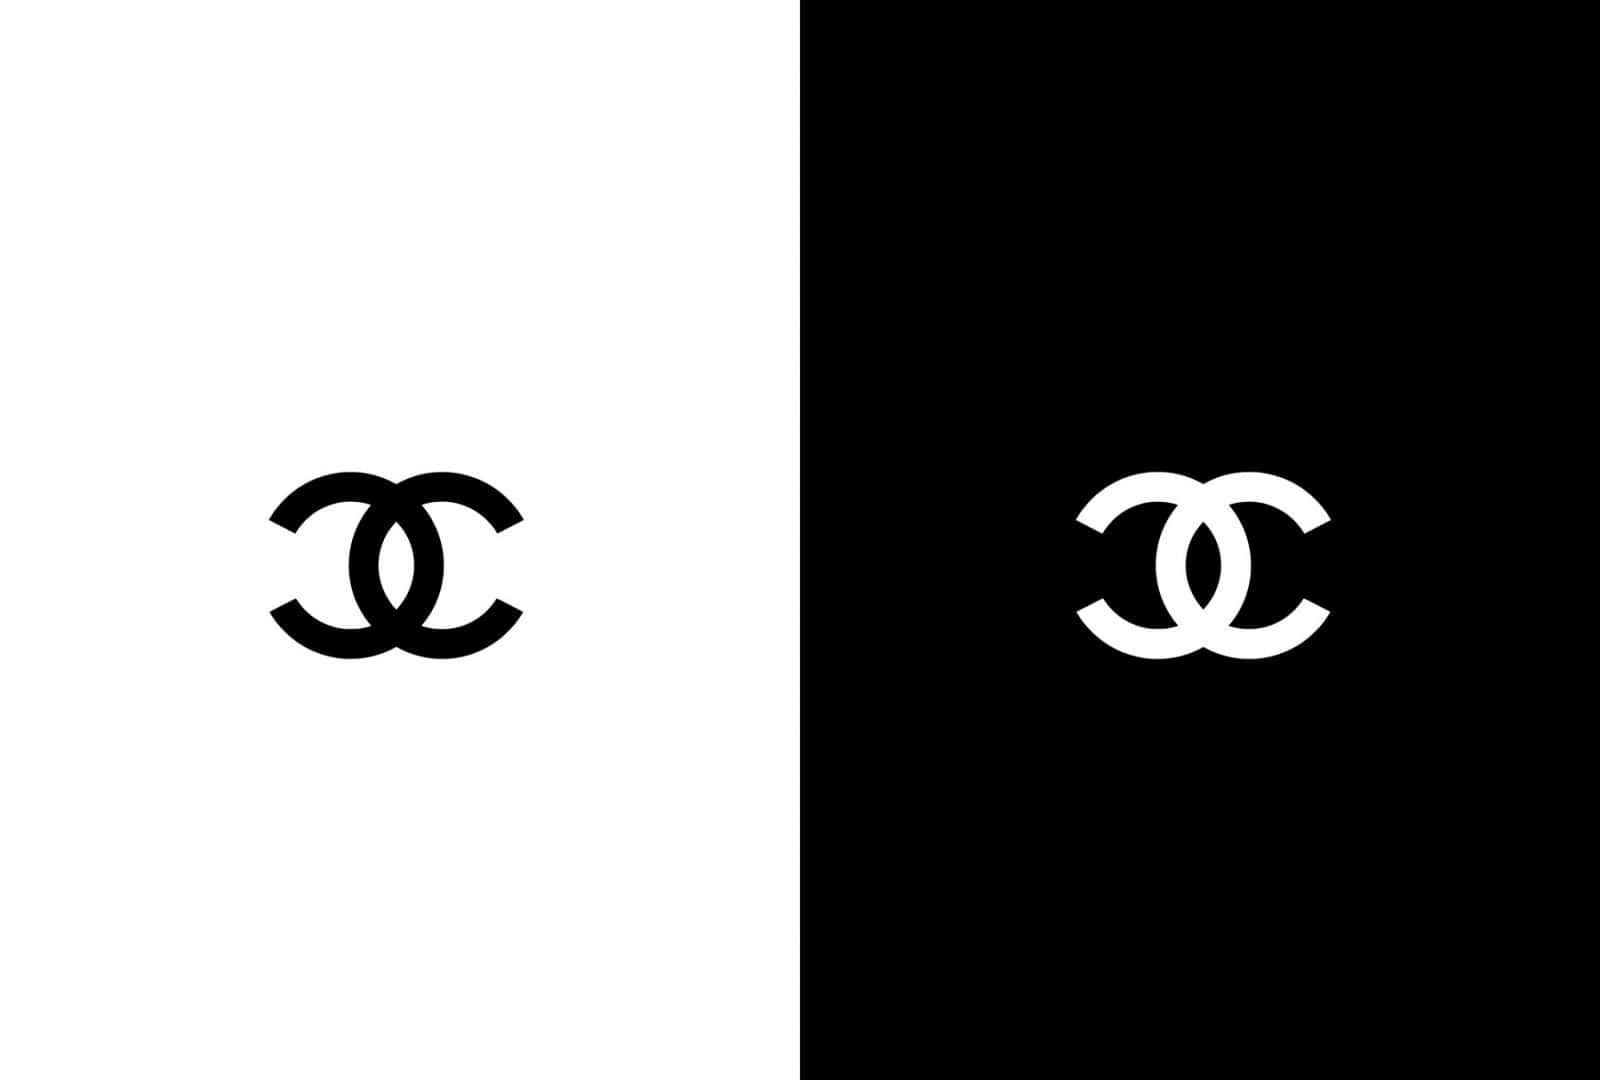 The Logo of Luxury Brand Chanel